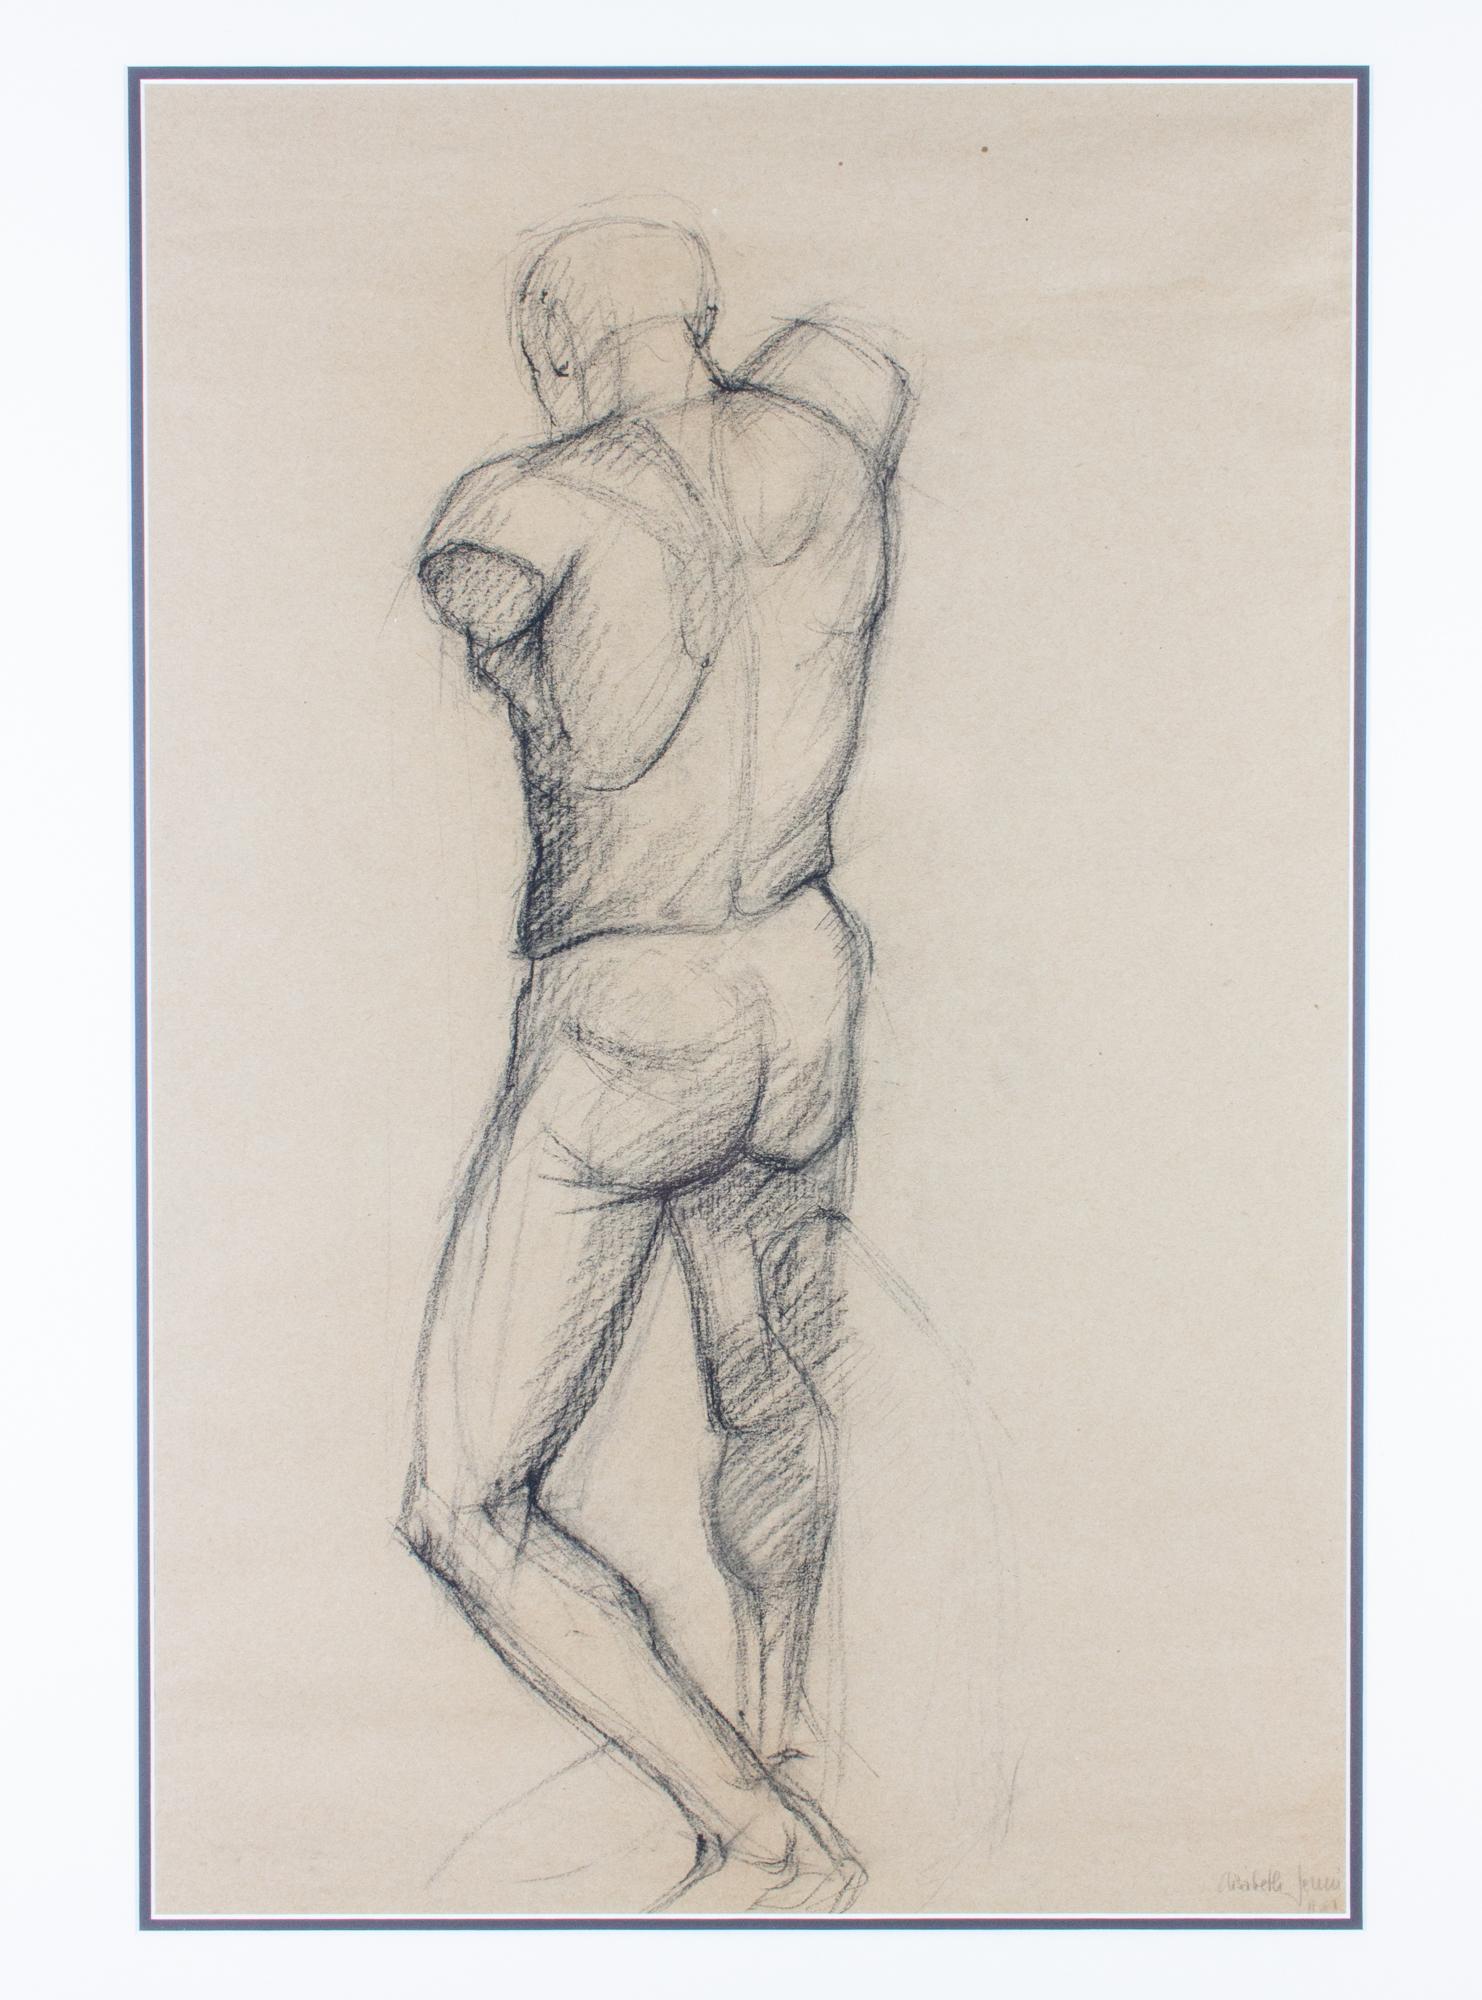 Discovered in France, this charcoal study of a male nude figure has been newly framed with a double mat (black Innside with white outside) in a bronze gilt frame. The paper used for the sketch is a beige or light tan color. The charcoal image shows